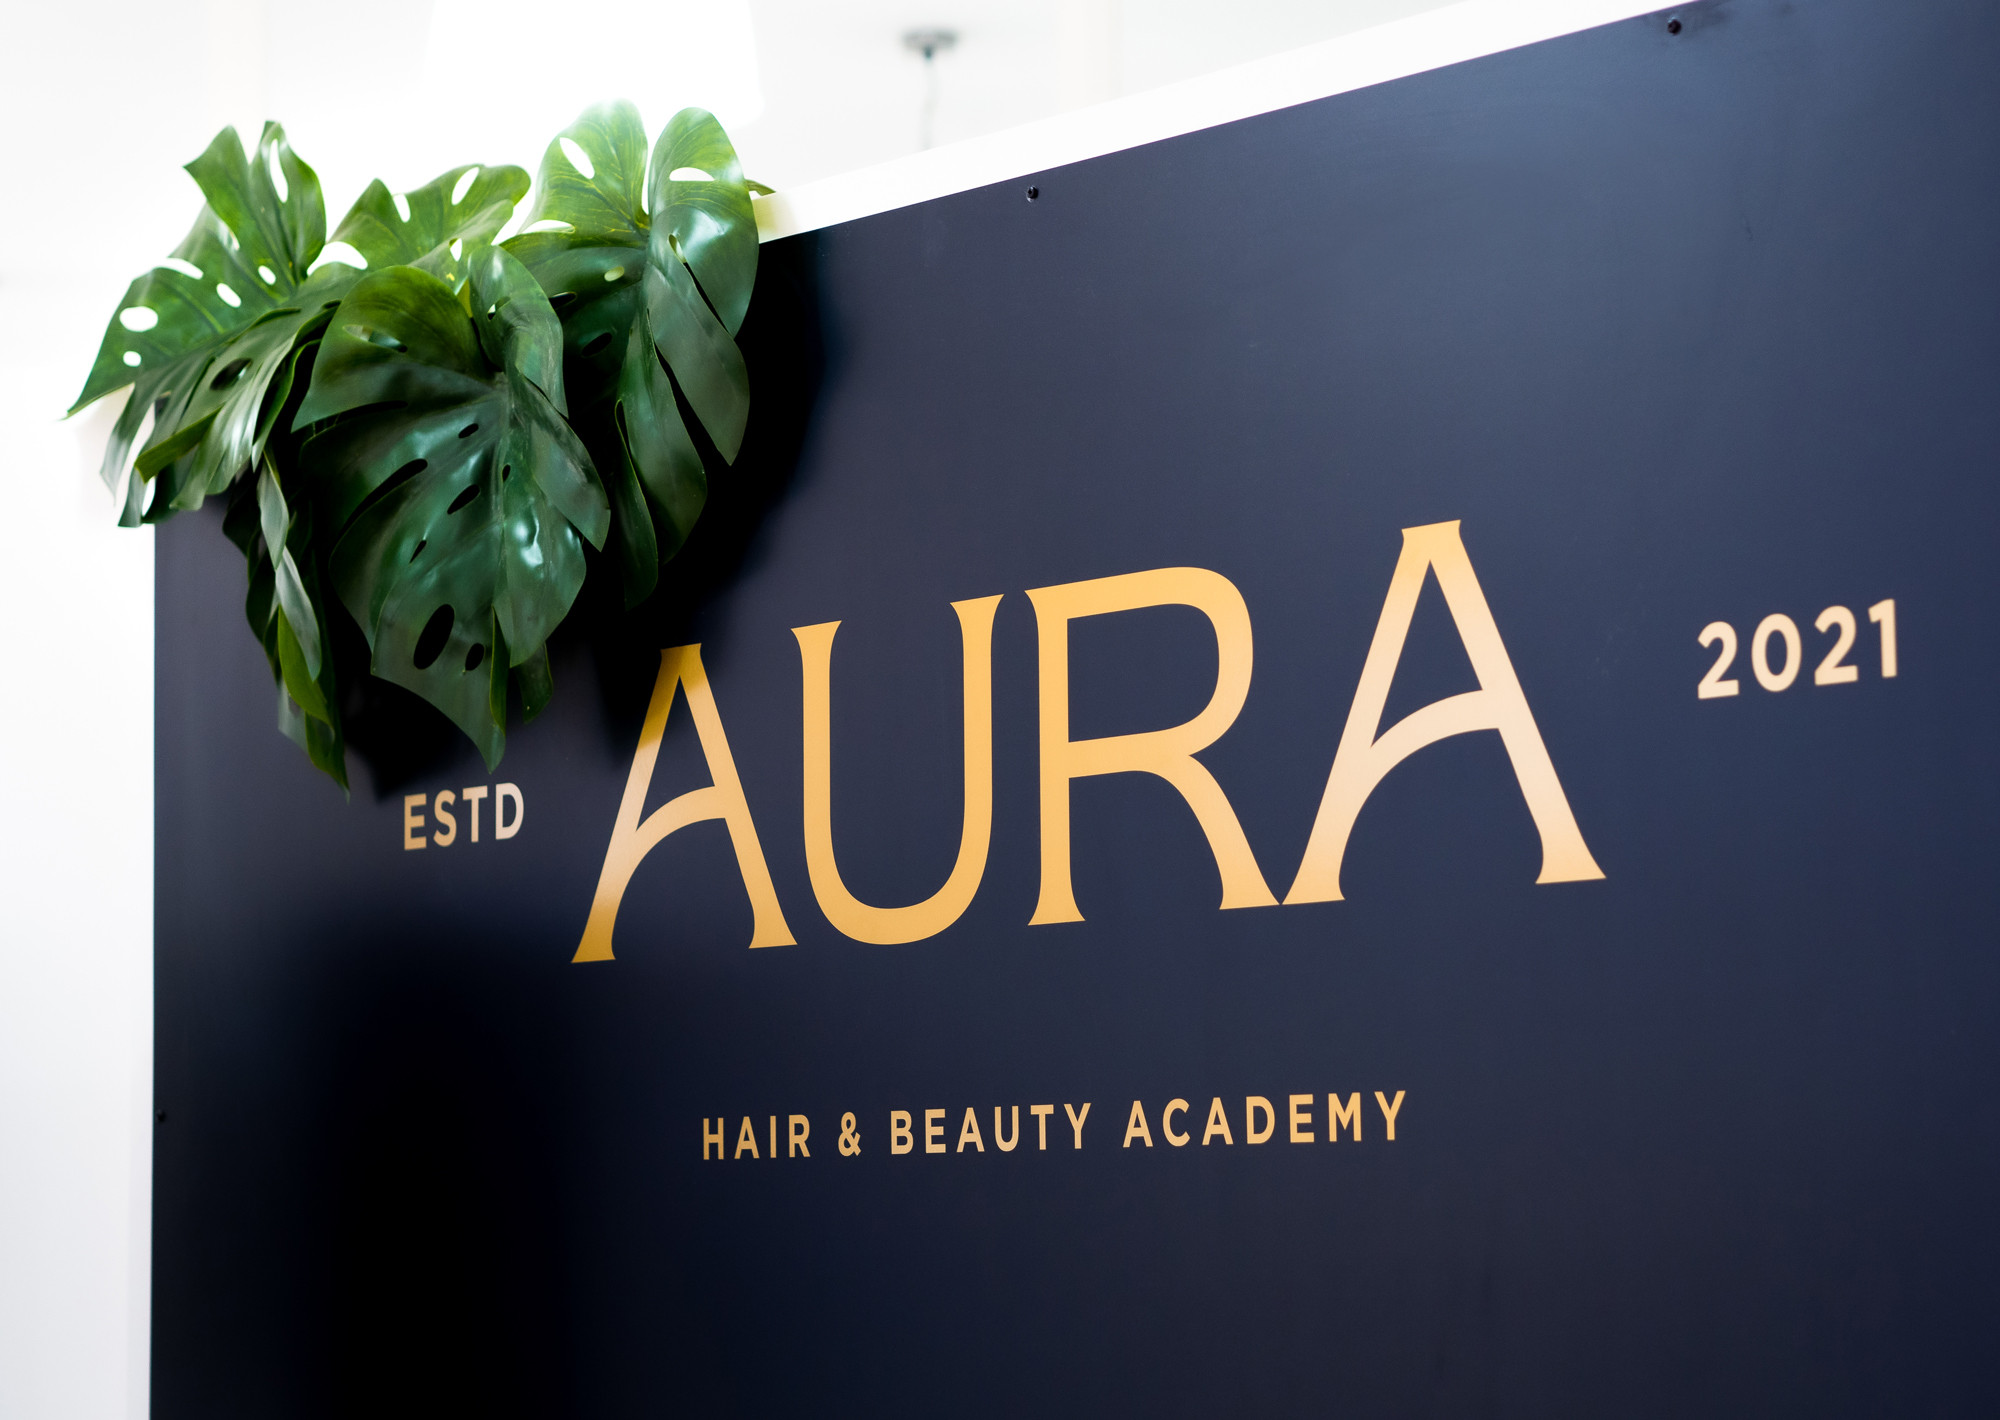 Aura hair salon signage design by root studio lincoln leicester 2